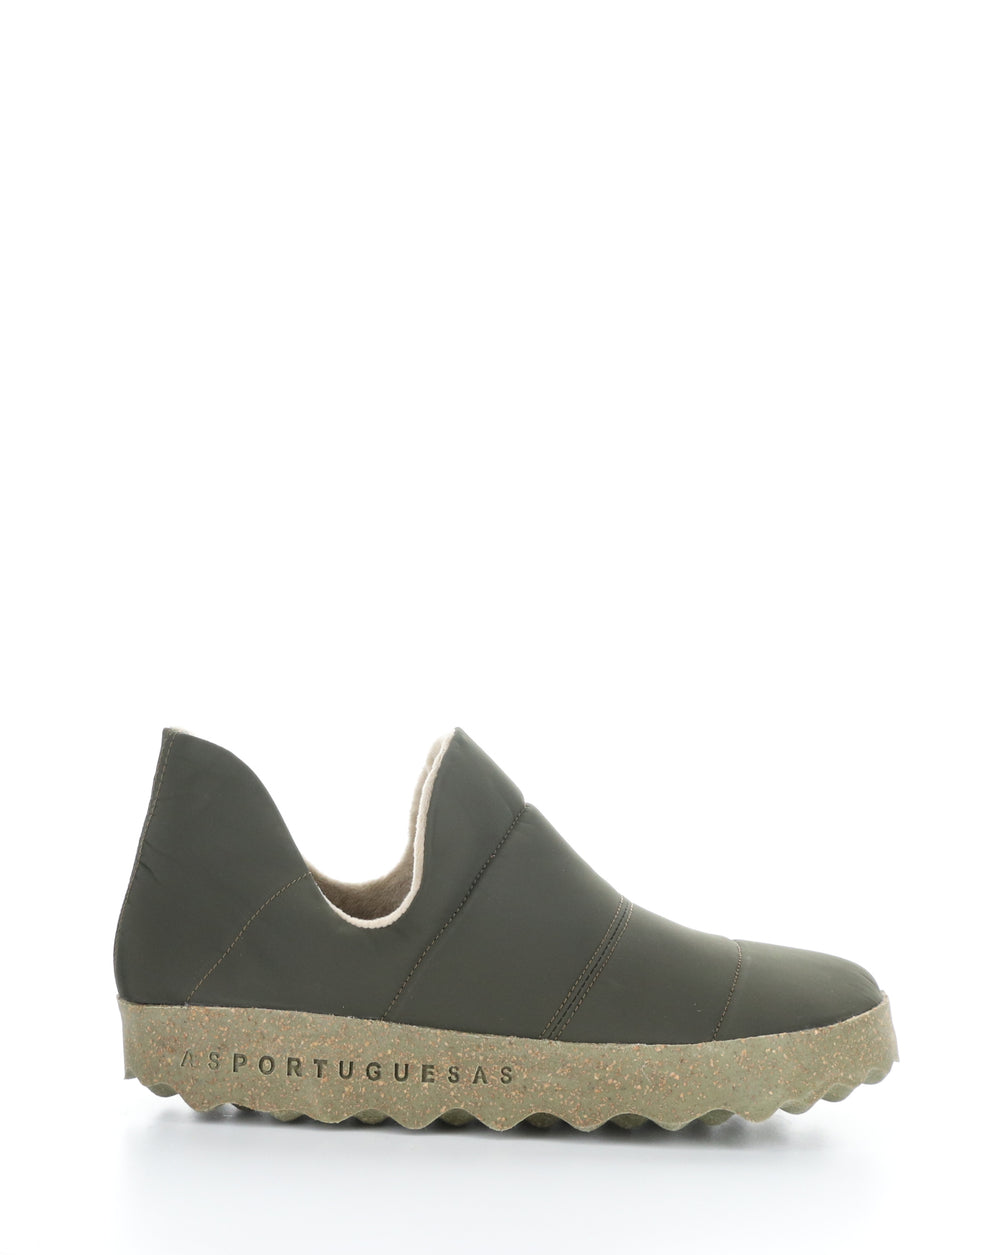 CRUS150ASPM 007 MILITARY GREEN Round Toe Shoes